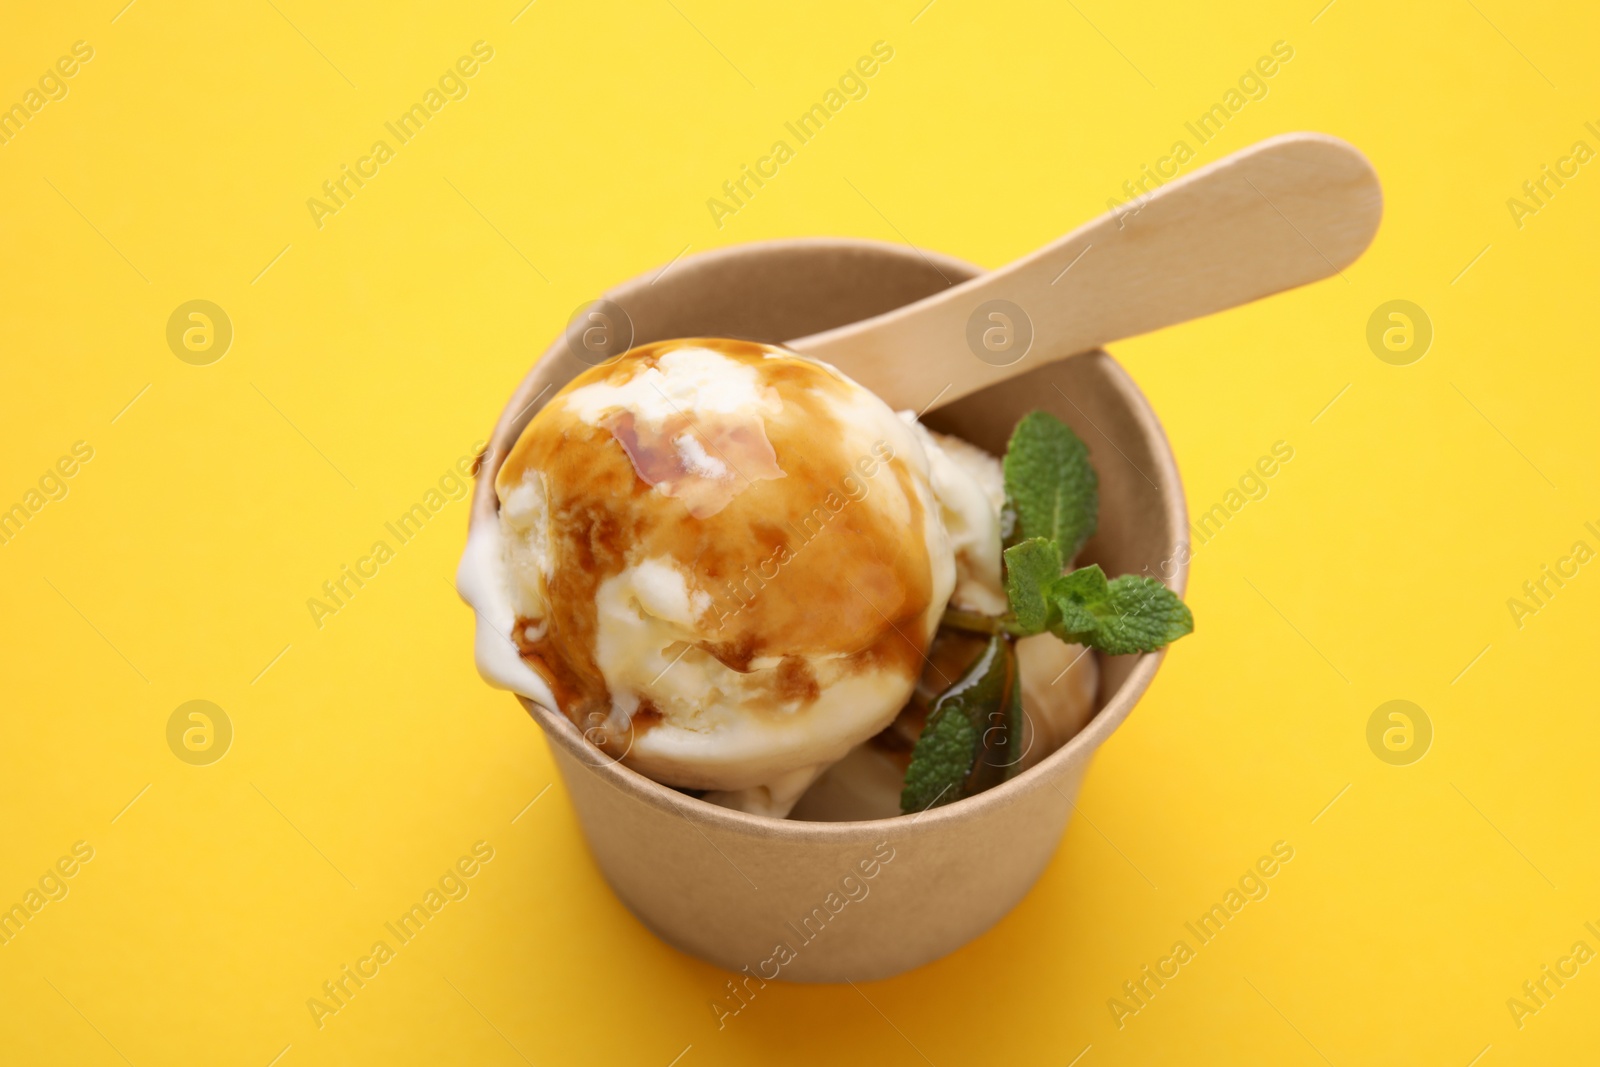 Photo of Scoops of ice cream with caramel sauce and mint leaves on yellow table, above view